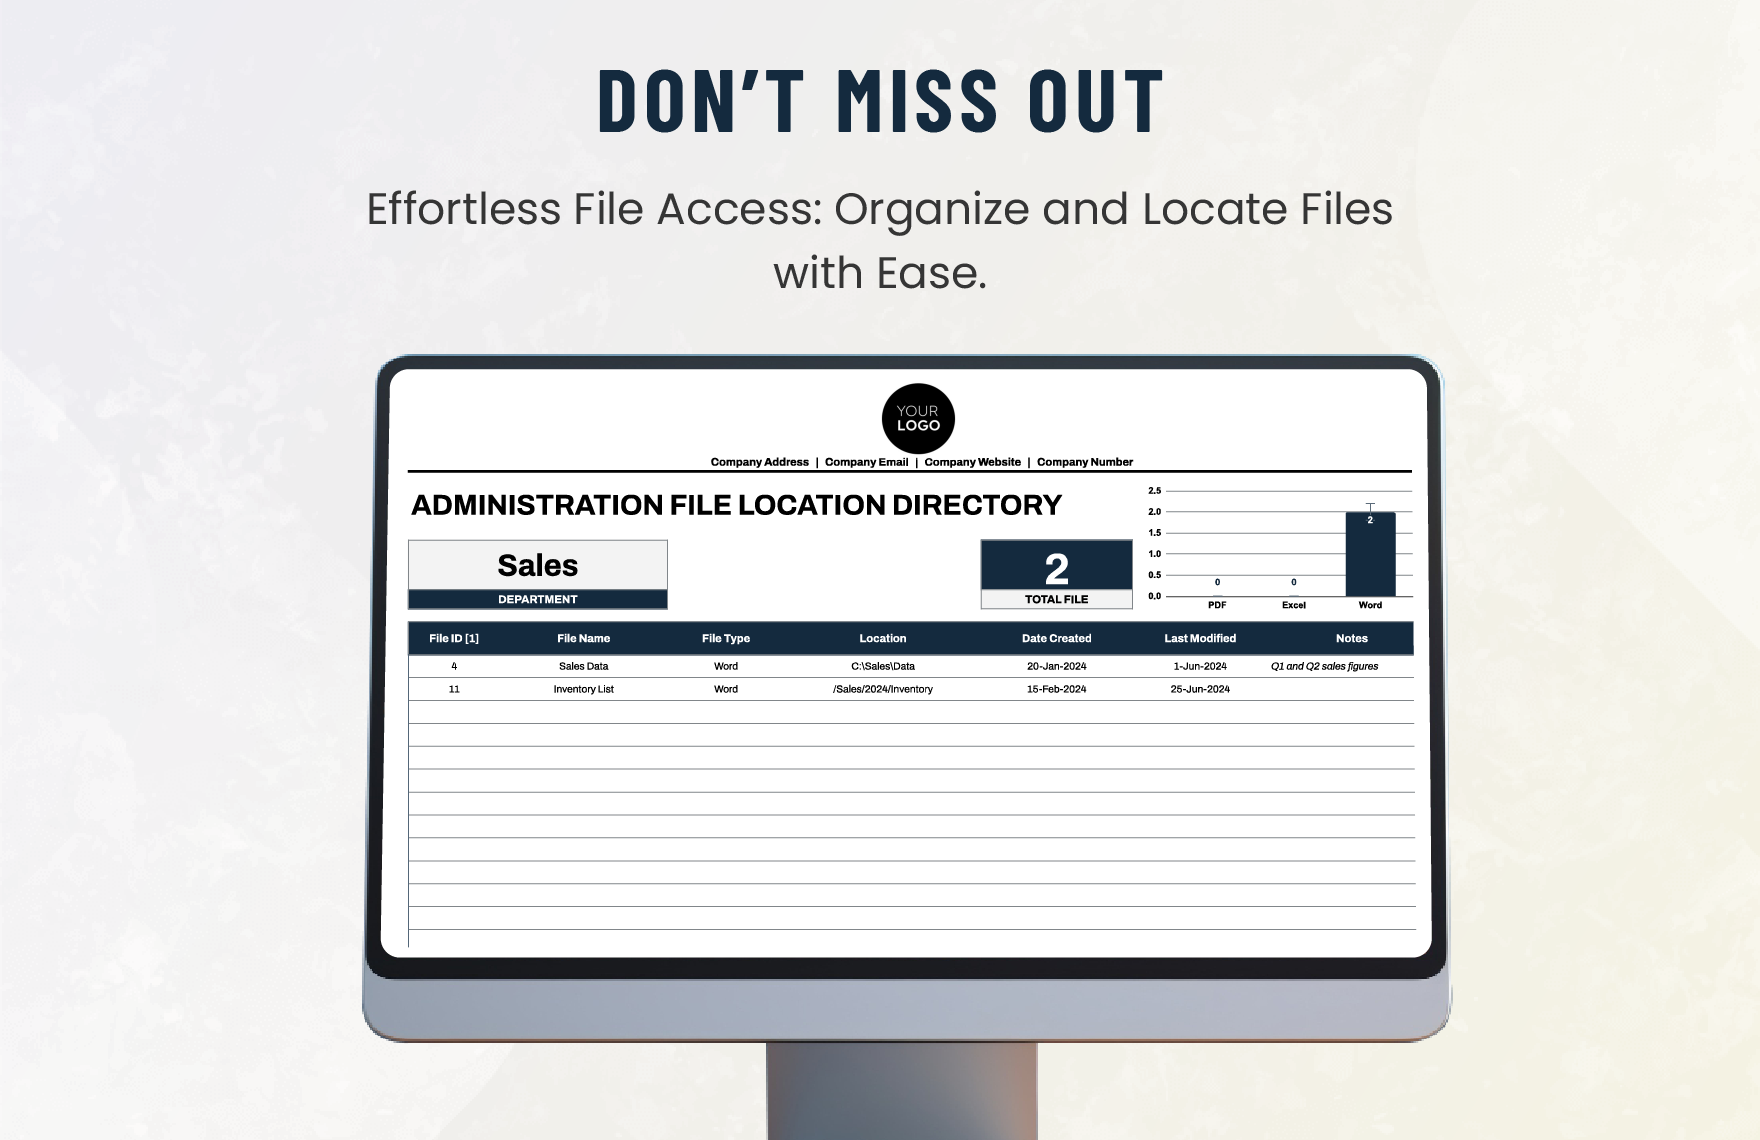 Administration File Location Directory Template